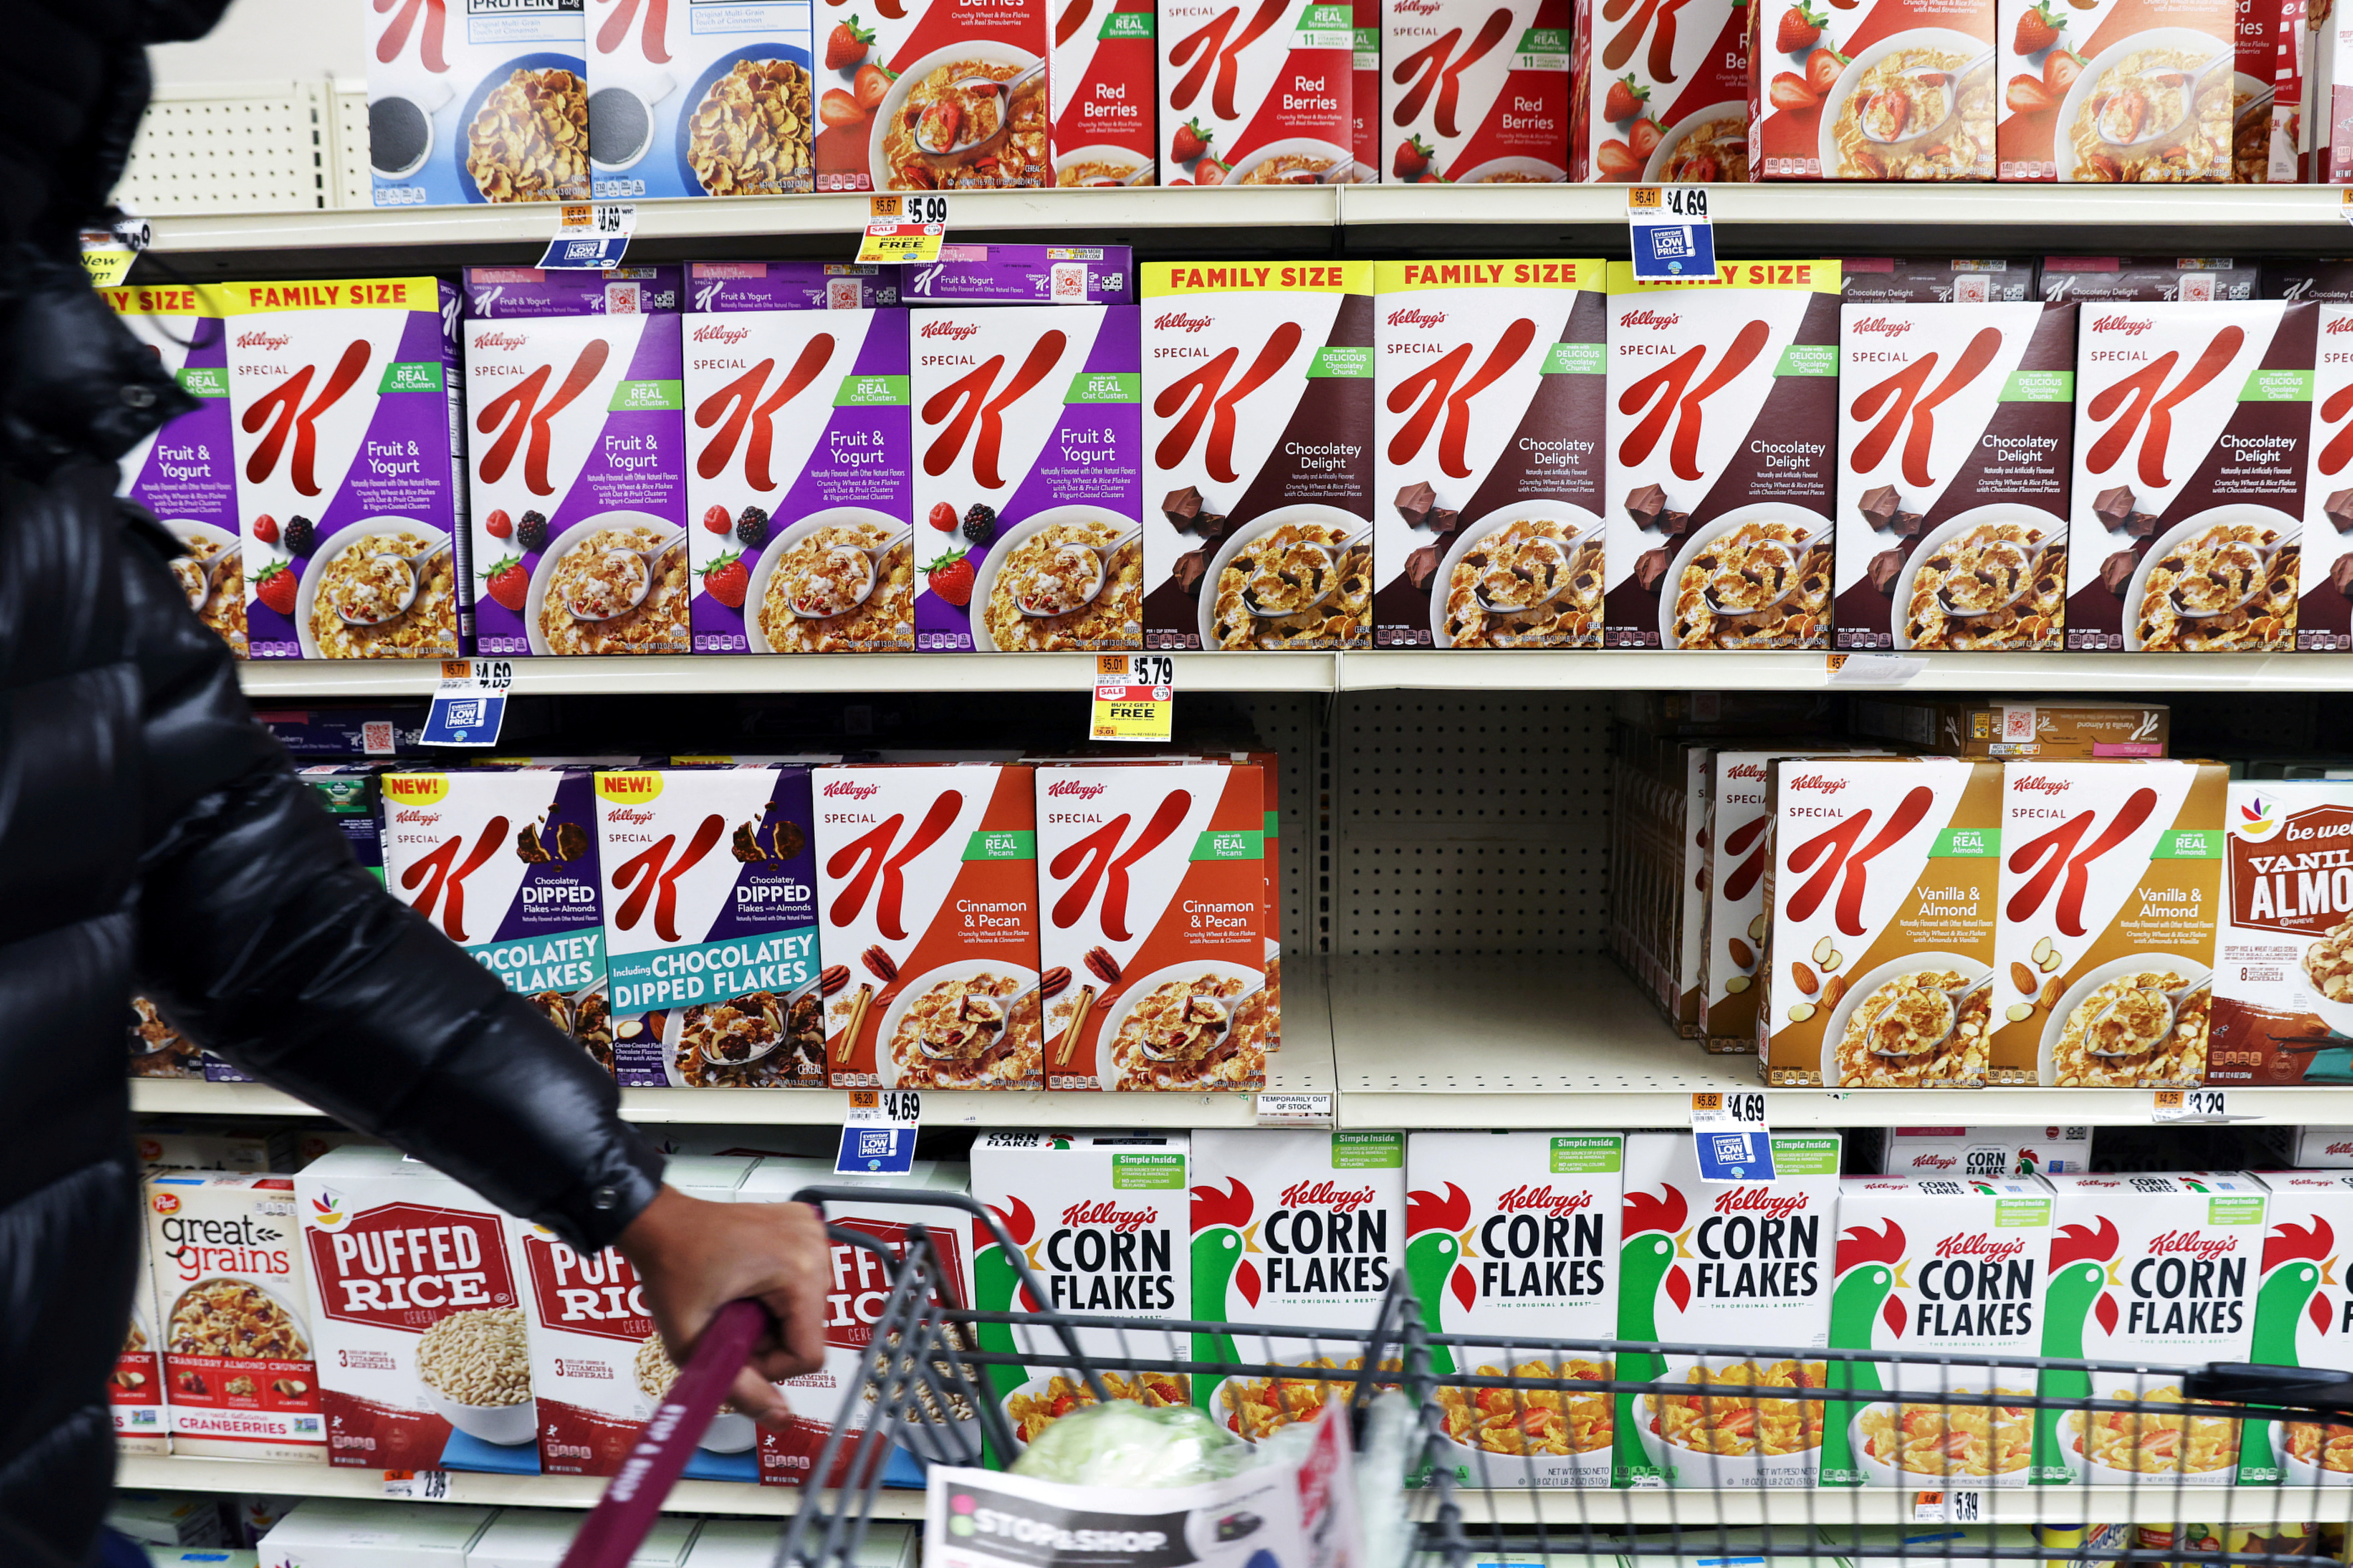 A person walks by a display of Kellogg's cereals, owned by Kellogg Company, in a store in Queens, New York City